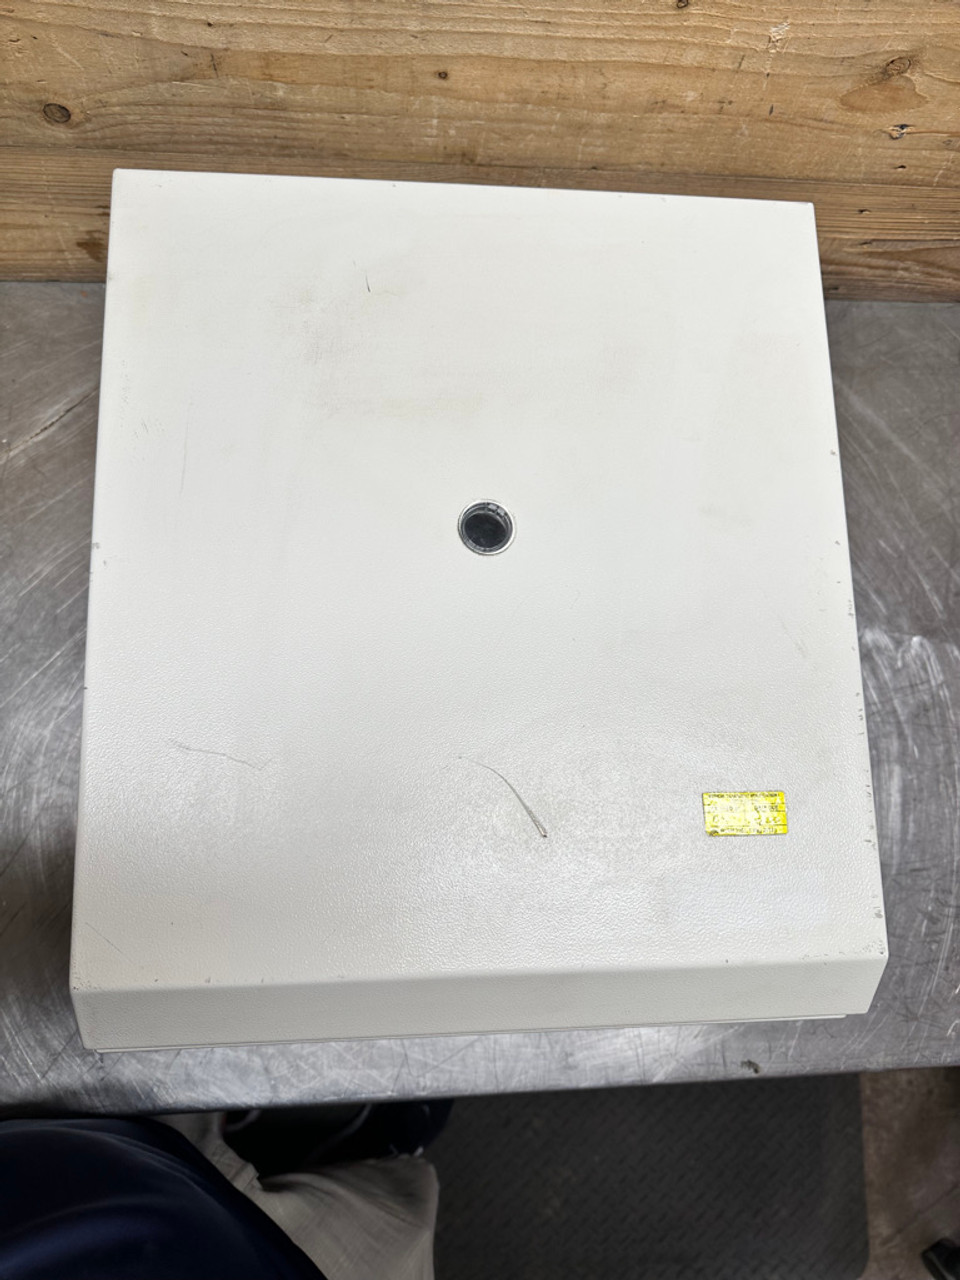 CL10 Centrifuge with Fixed Angle Rotor 11210901 Thermo Scientific